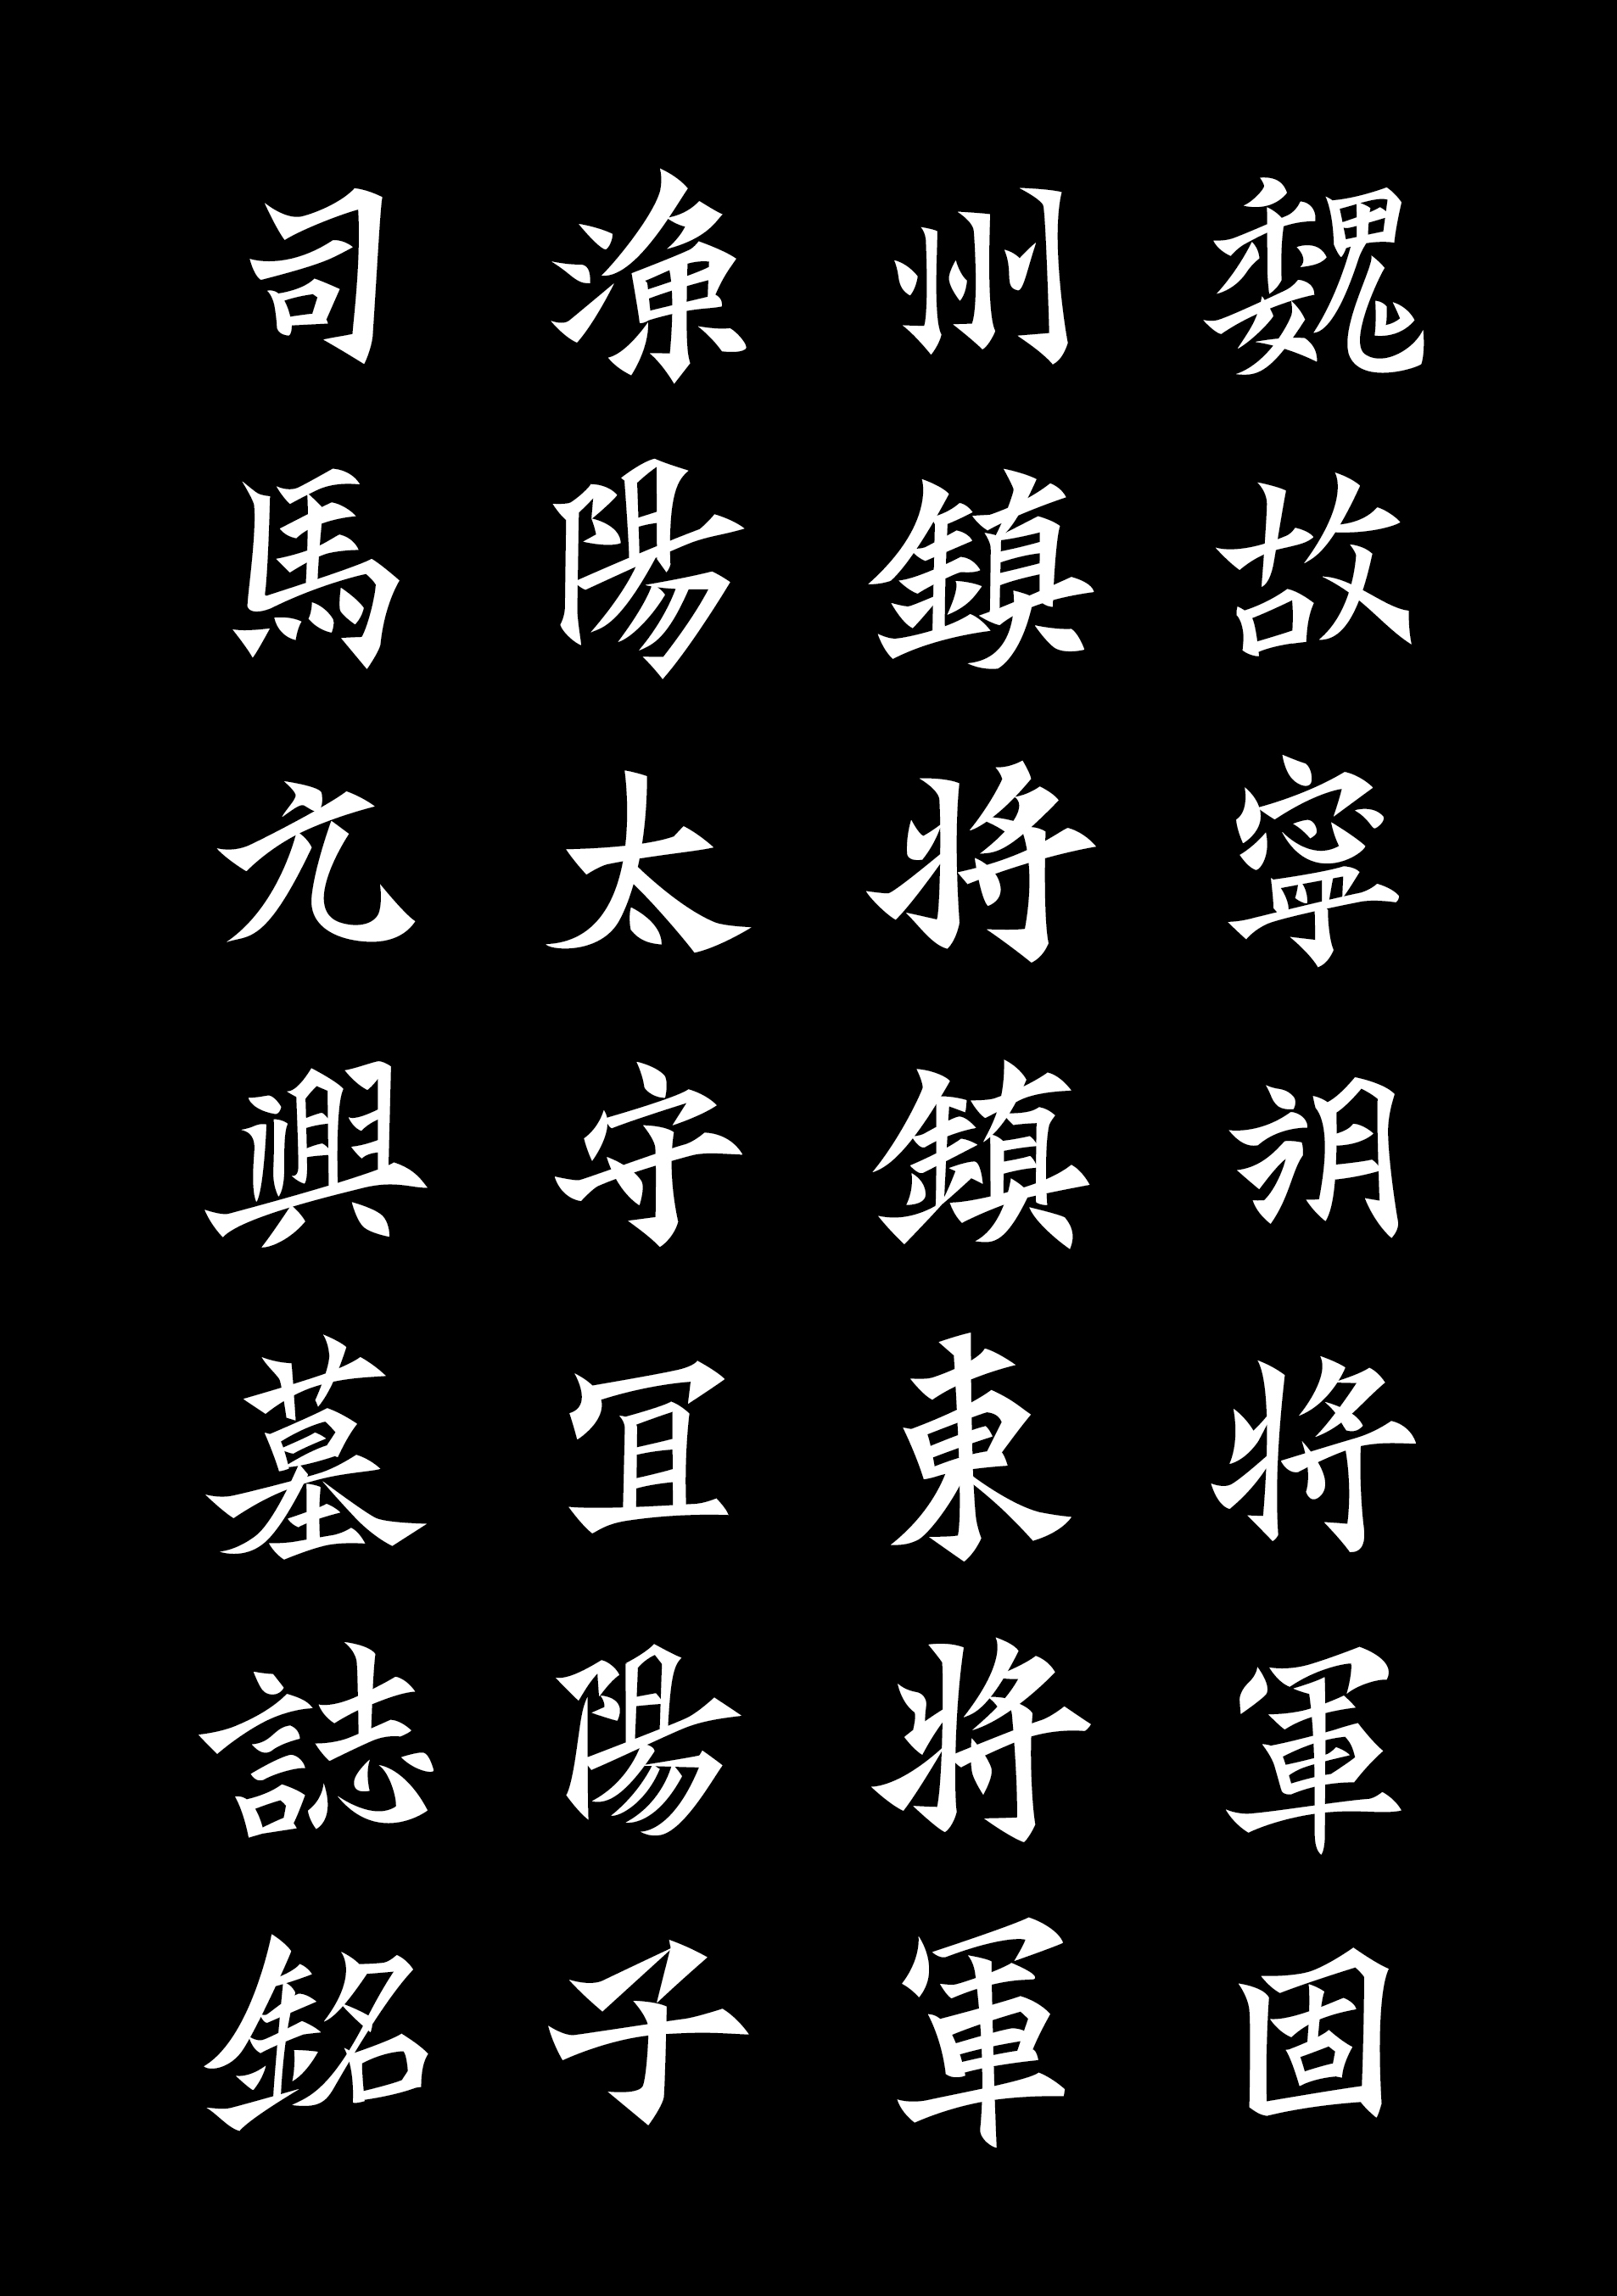 Interesting Chinese Creative Font Design-The Epitaph of Si Mashao in Northern Wei Dynasty